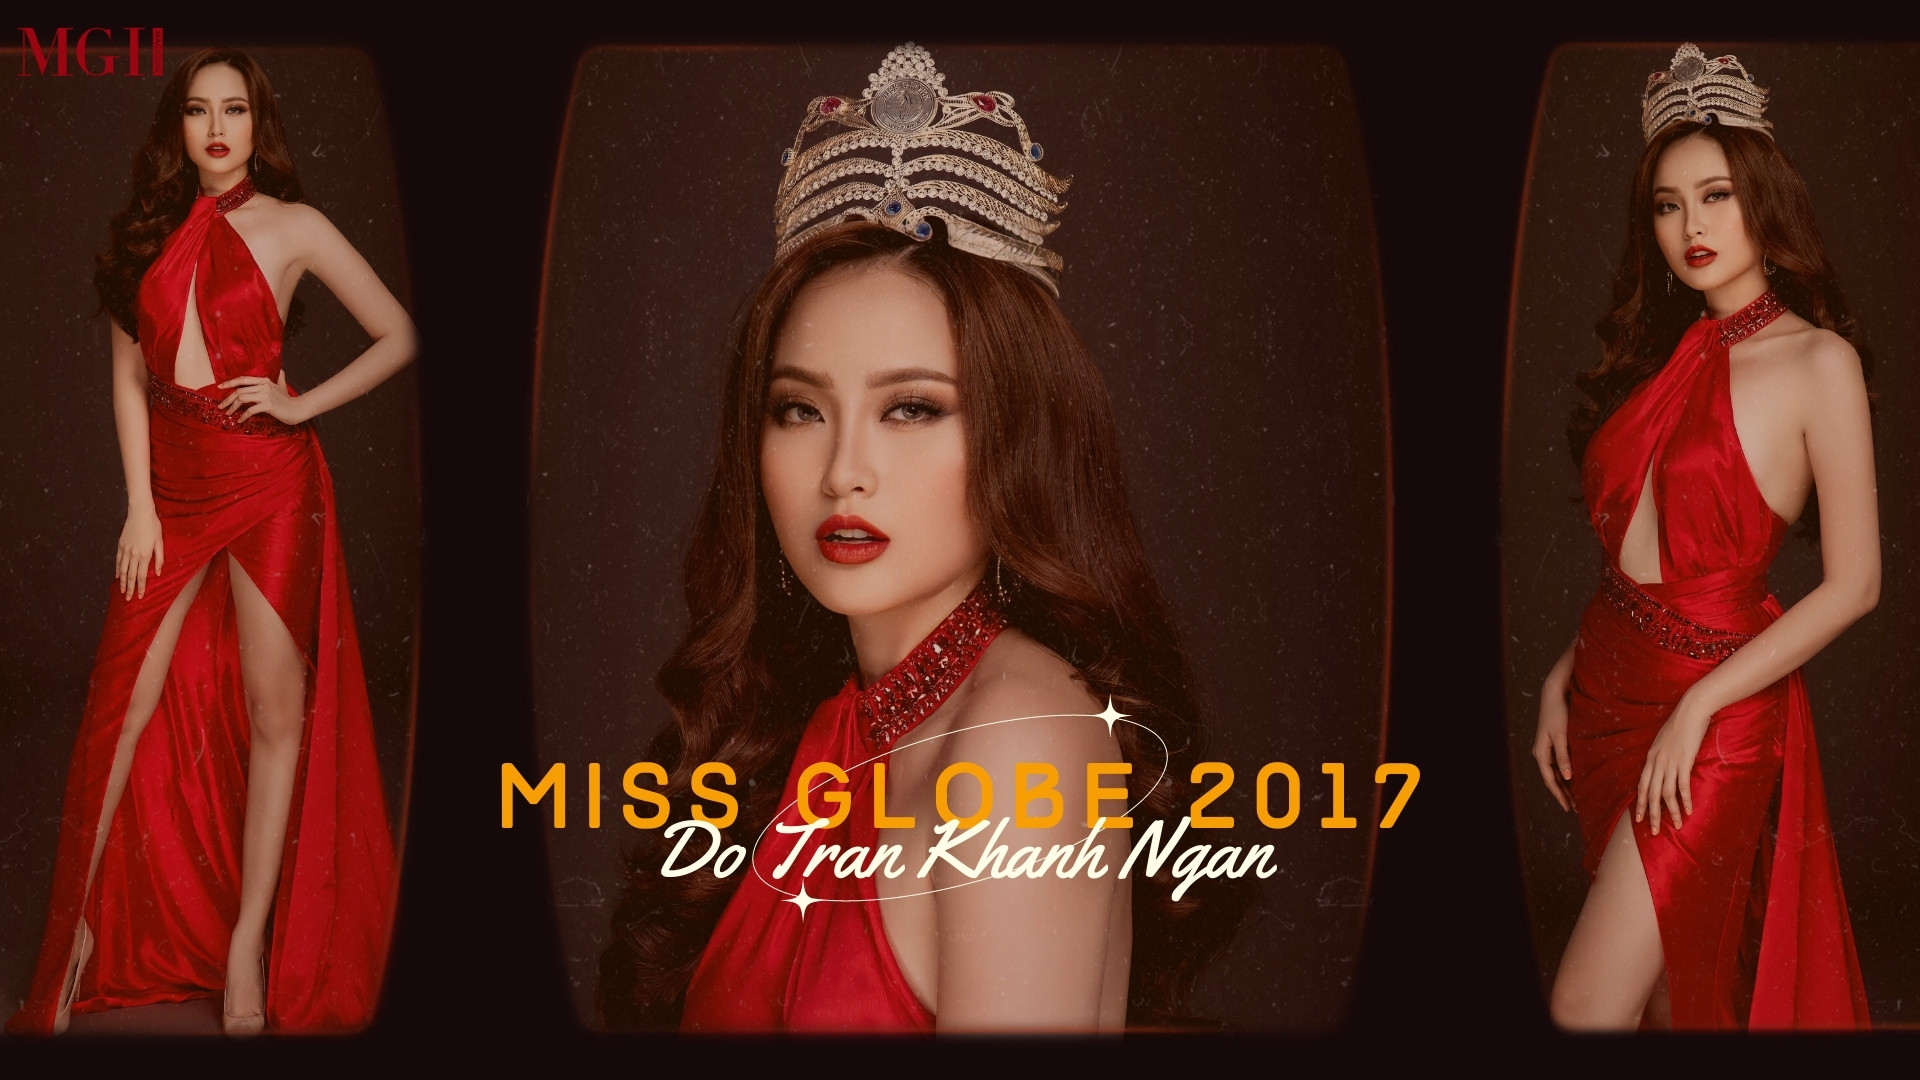 Miss Globe 2017: “My reign has never ended”